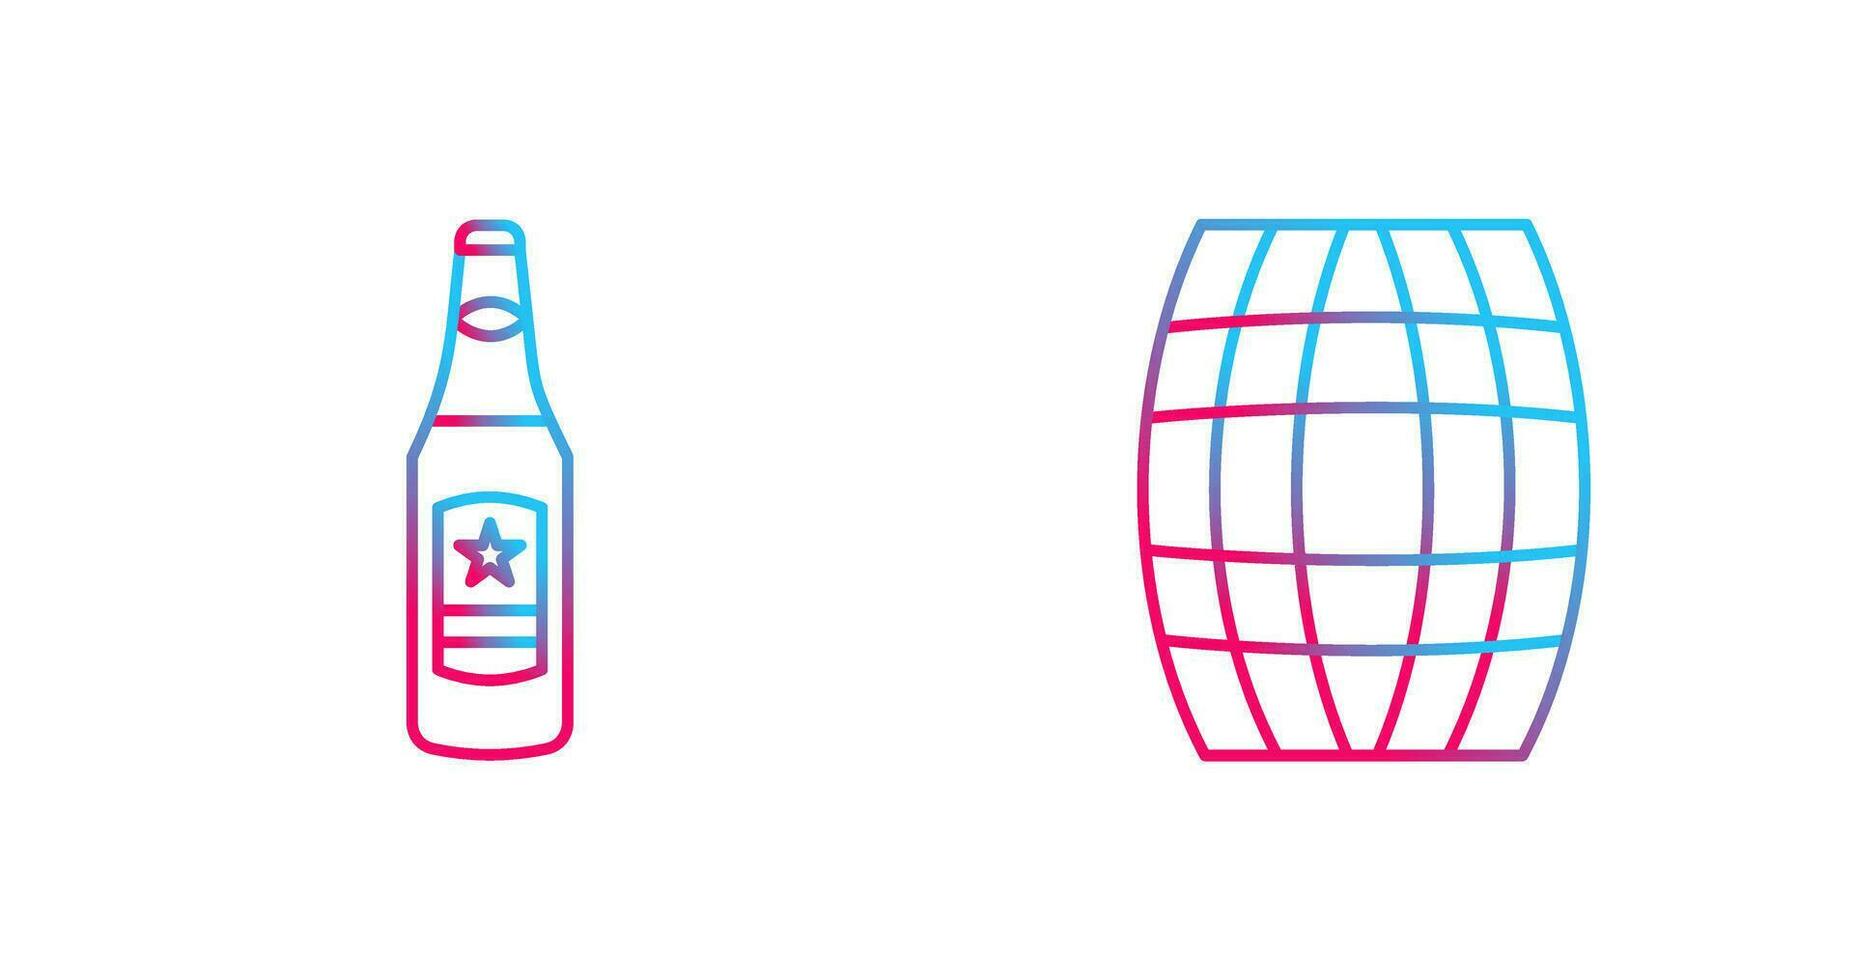 Beer Bottle and Barrel Icon vector